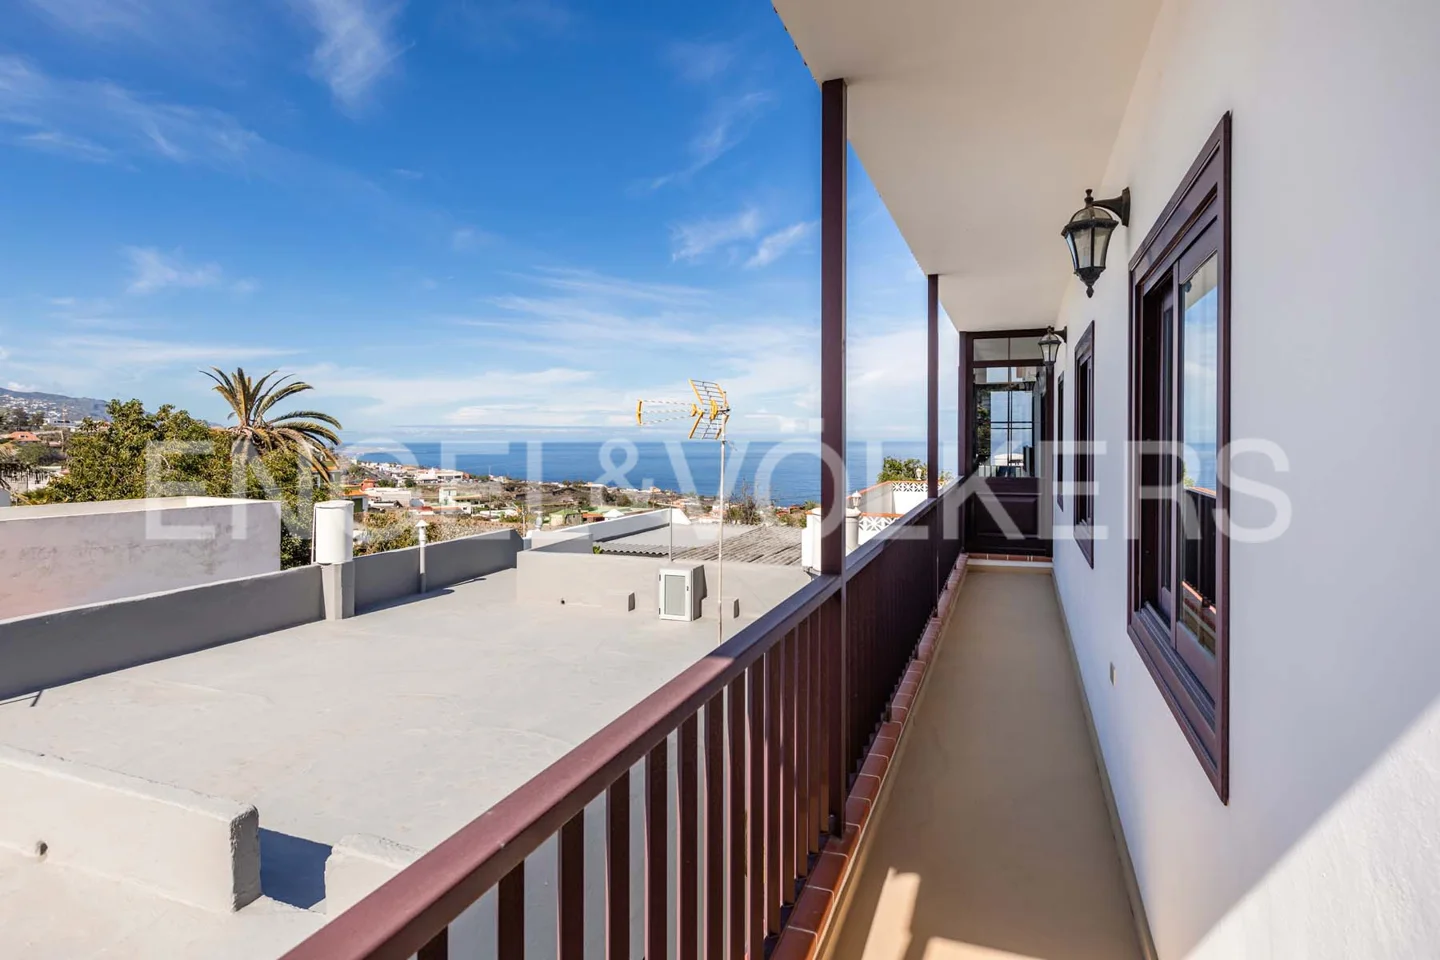 Versatile Estate with Sea Views: Perfect for Your Dream Project